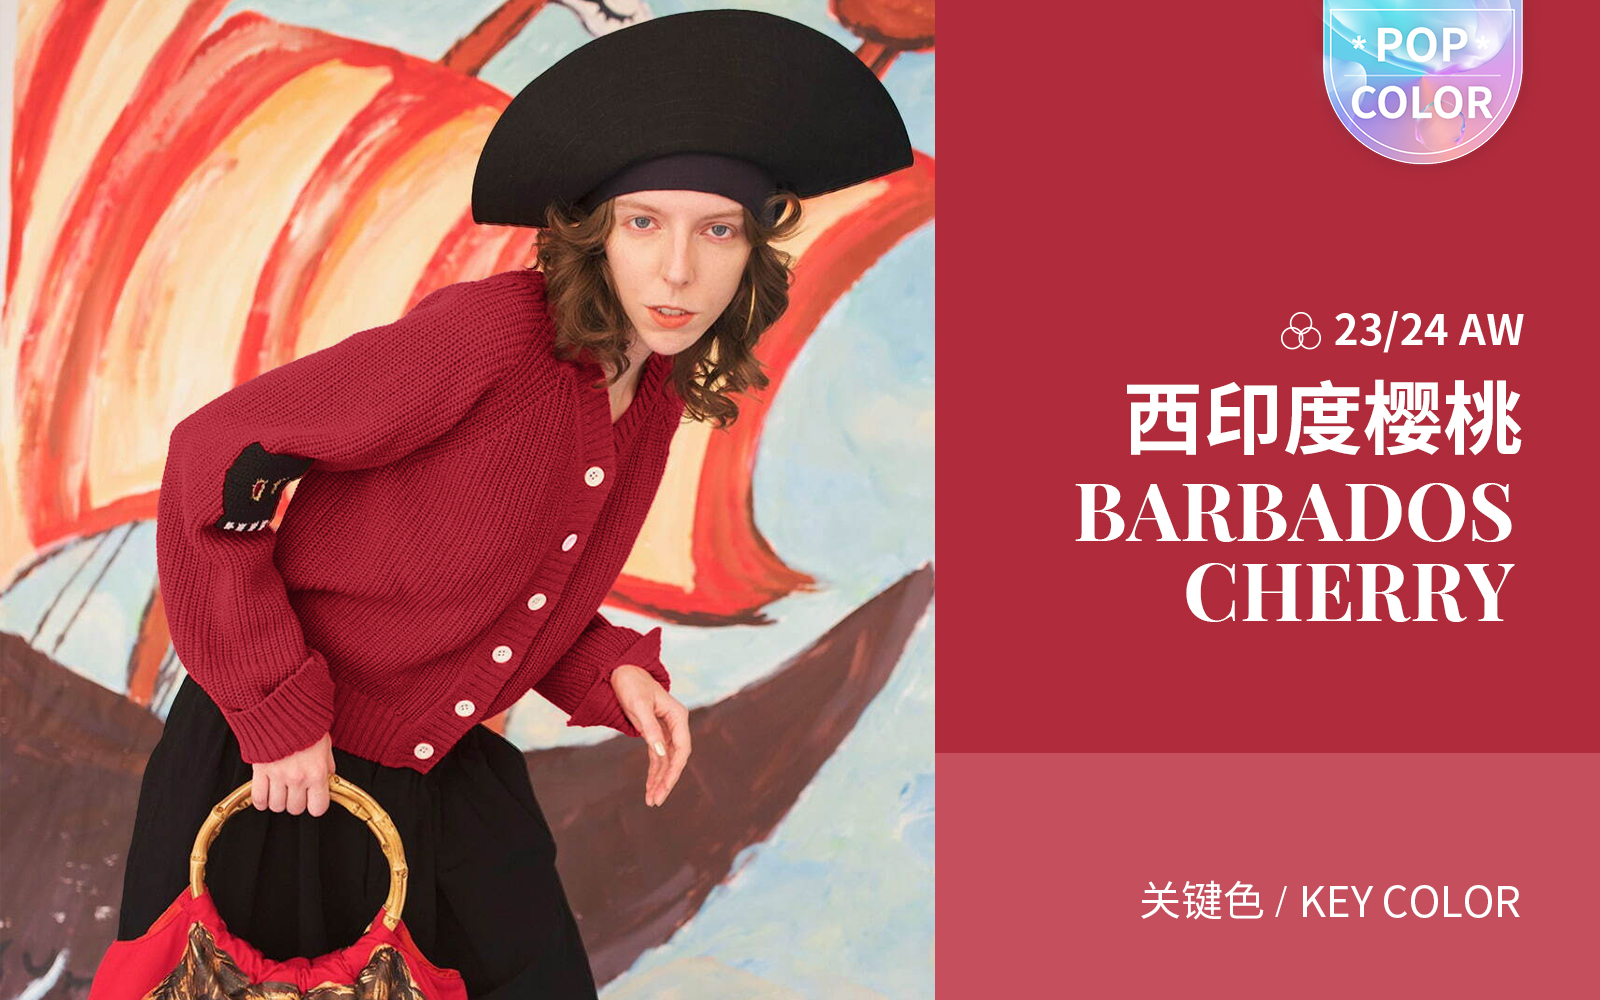 Barbados Cherry -- The Color Trend for Young Women's Knitwear